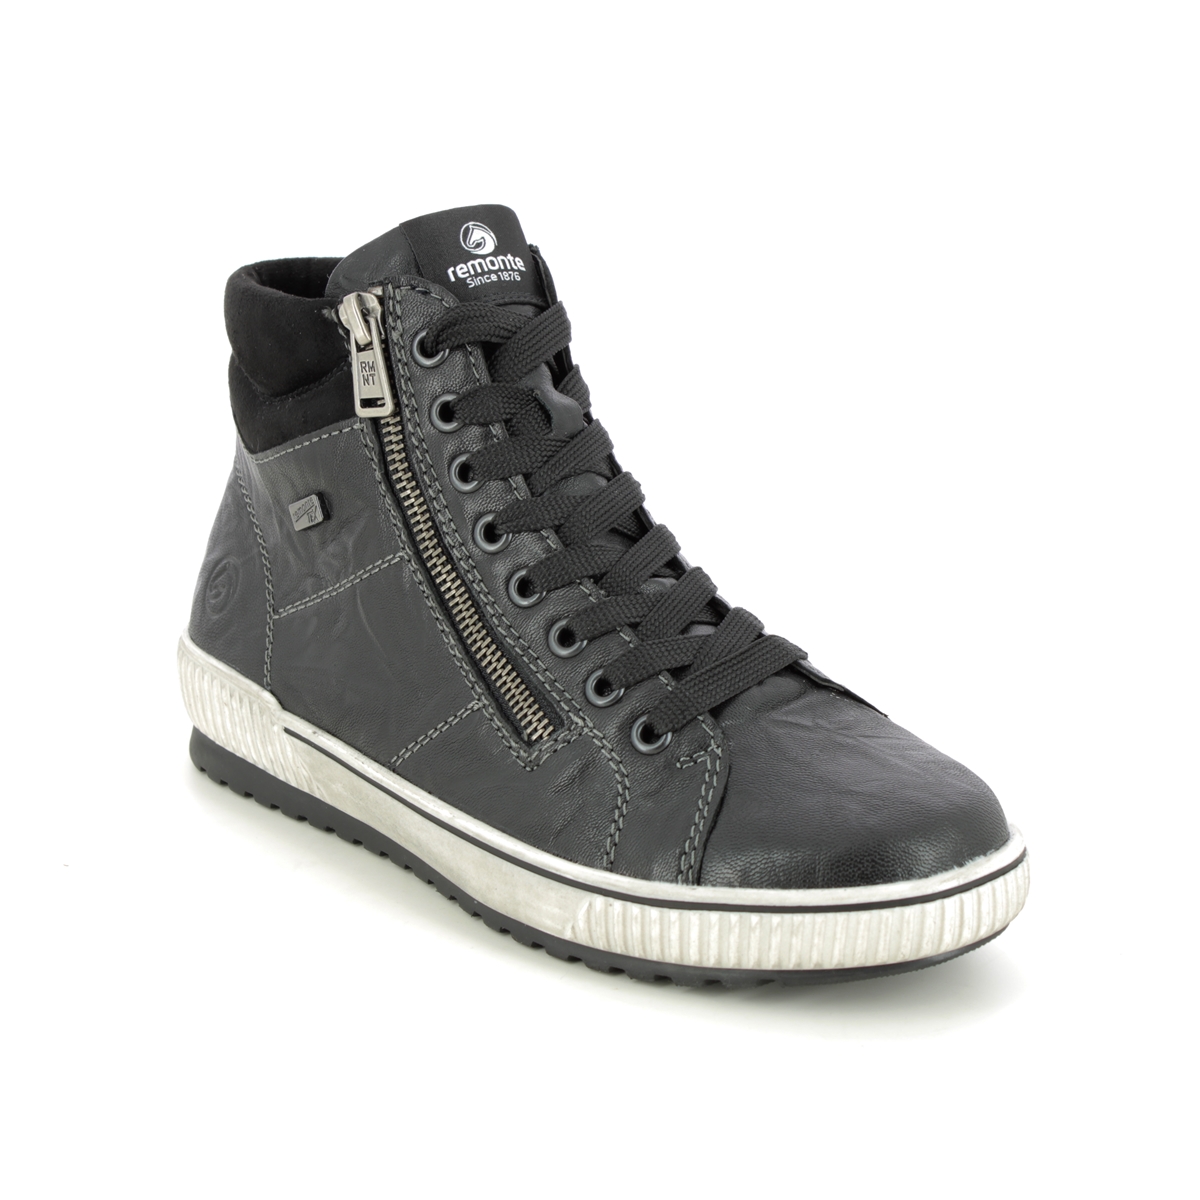 Remonte Tanaloto Tex Black Leather Womens Hi Tops D0772-01 In Size 42 In Plain Black Leather